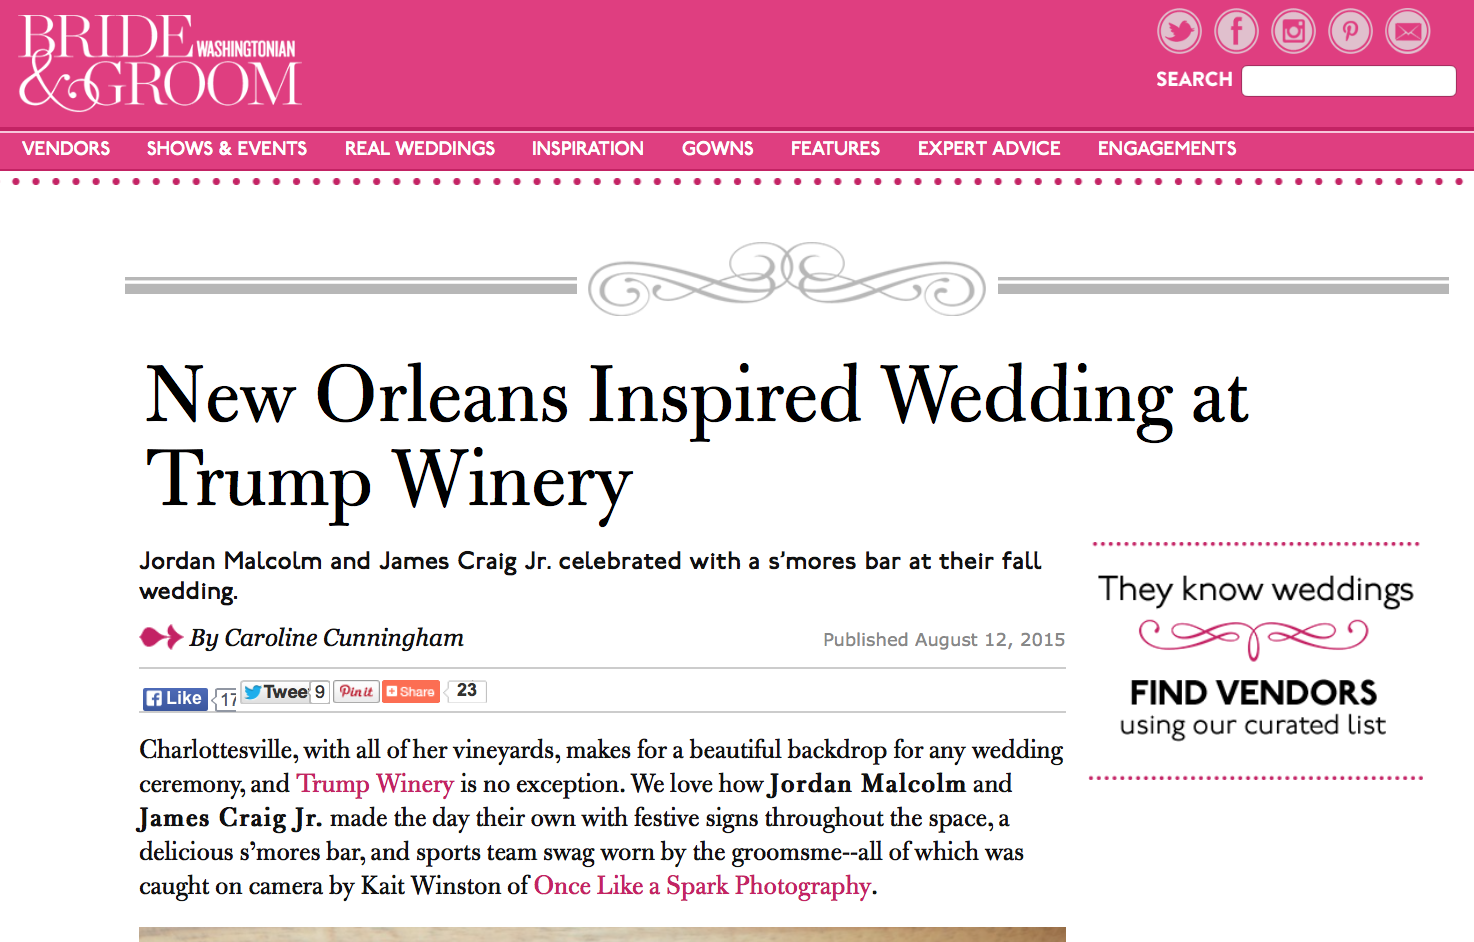 New Orleans Inspired Wedding at Trump Winery